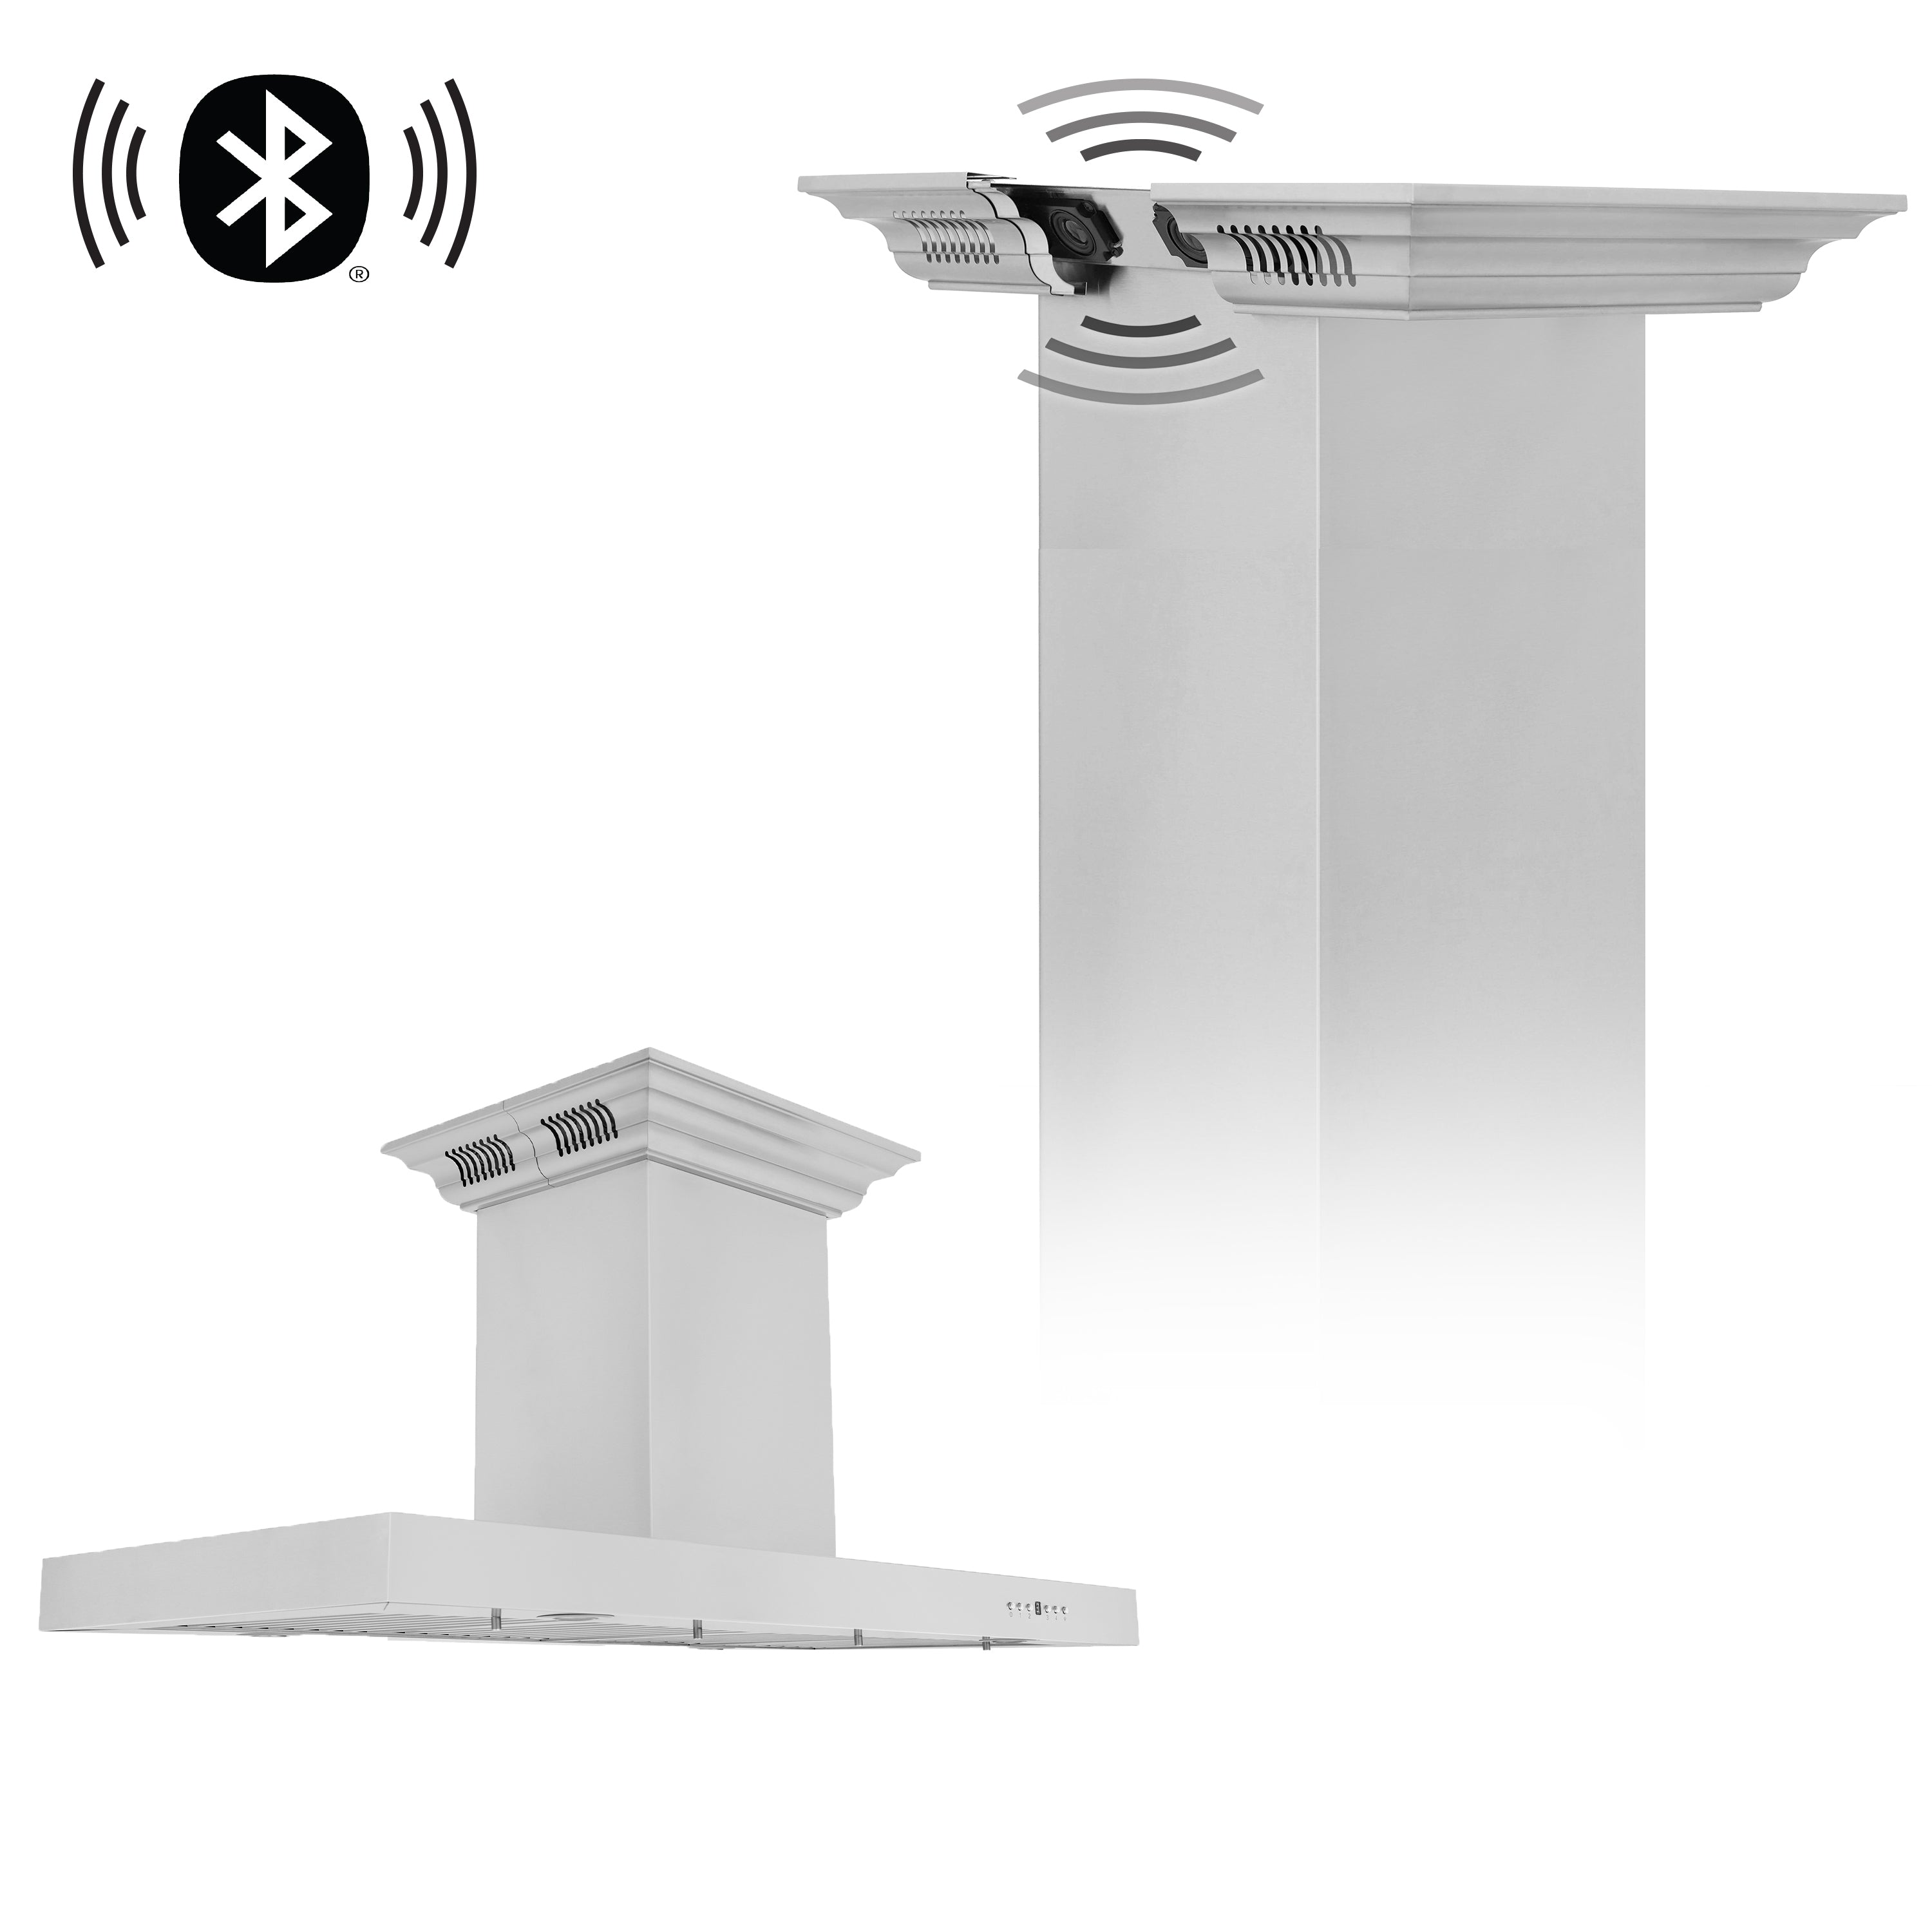 42" ZLINE CrownSound® Ducted Vent Island Mount Range Hood in Stainless Steel with Built-in Bluetooth Speakers (KE2iCRN-BT-42)